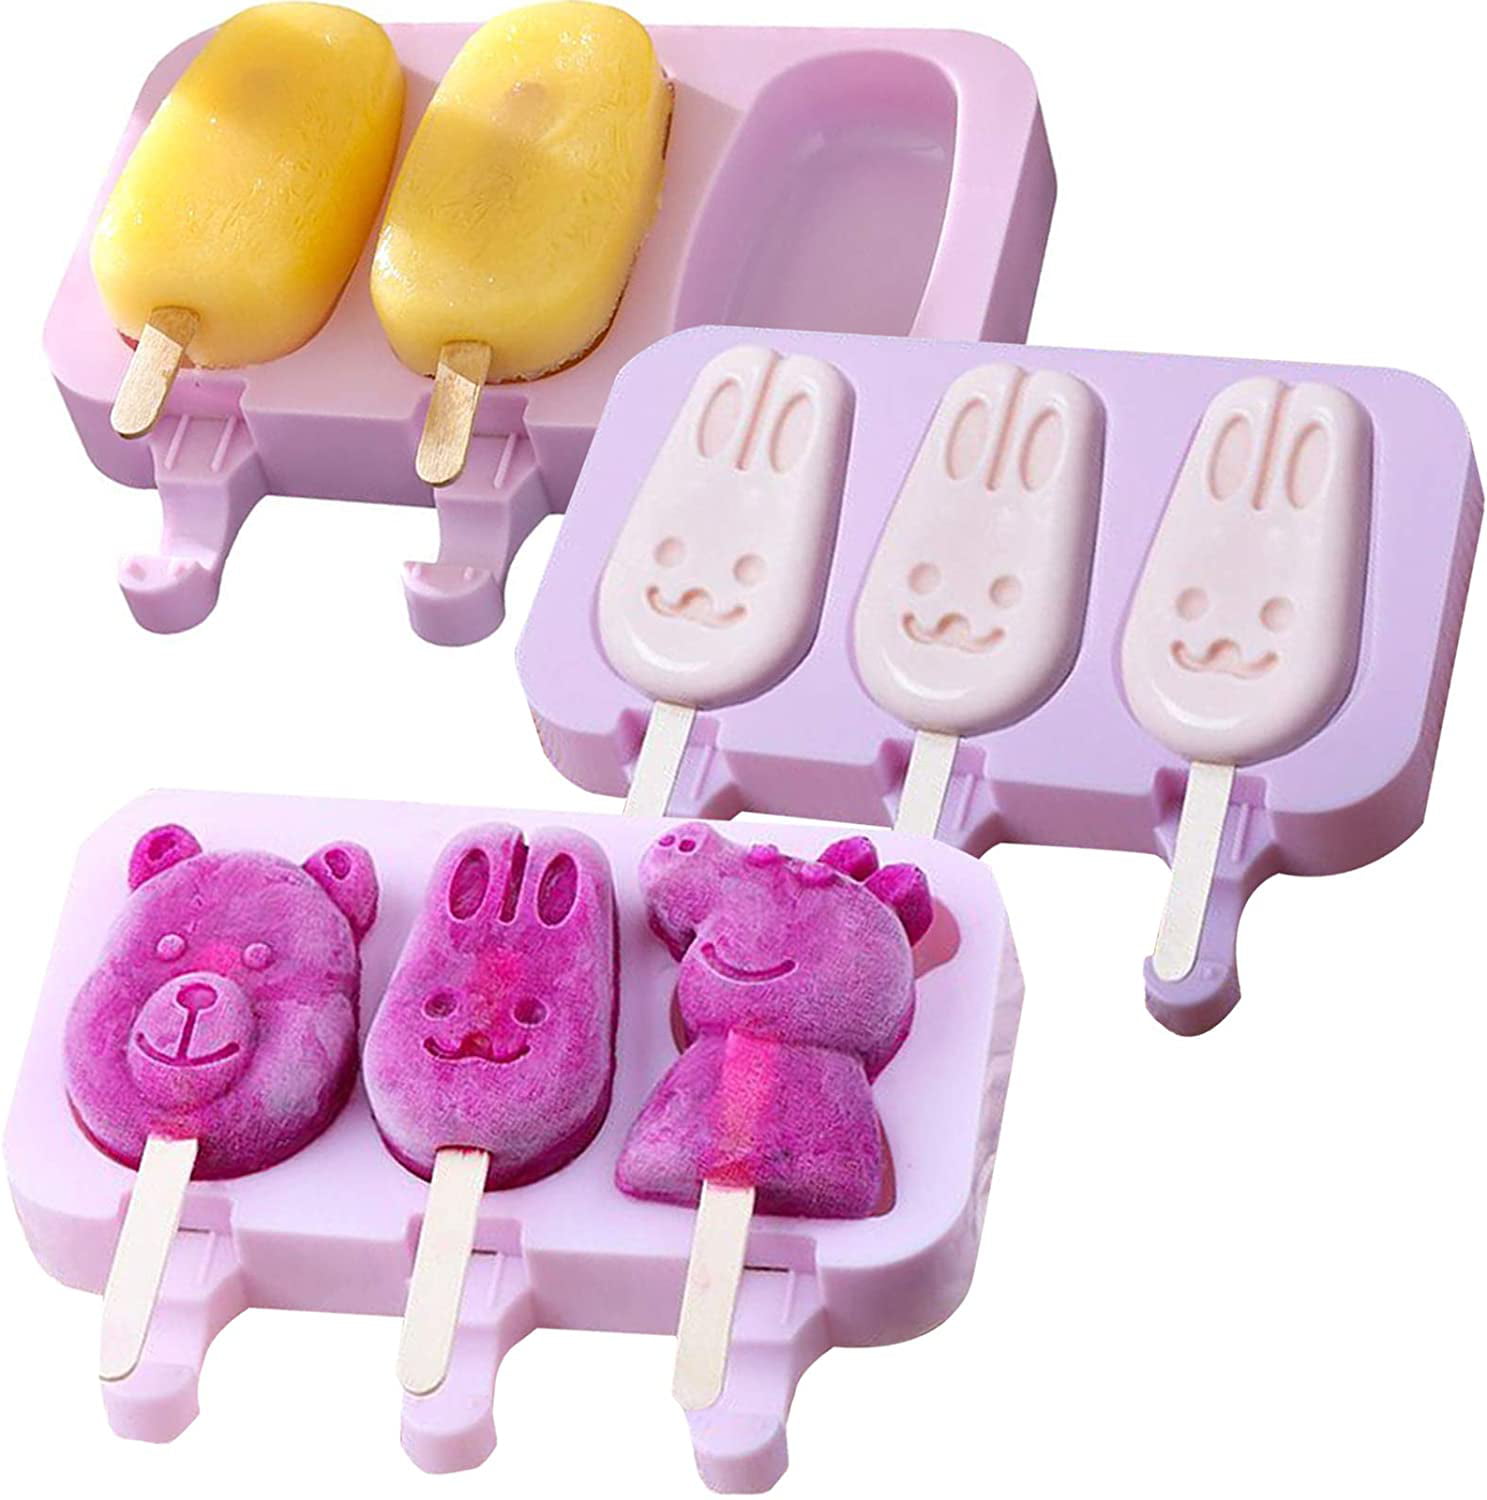 DIY Silicone Purple Frozen Ice Cream Mold Juice Popsicle Maker Ice Lolly Mould 